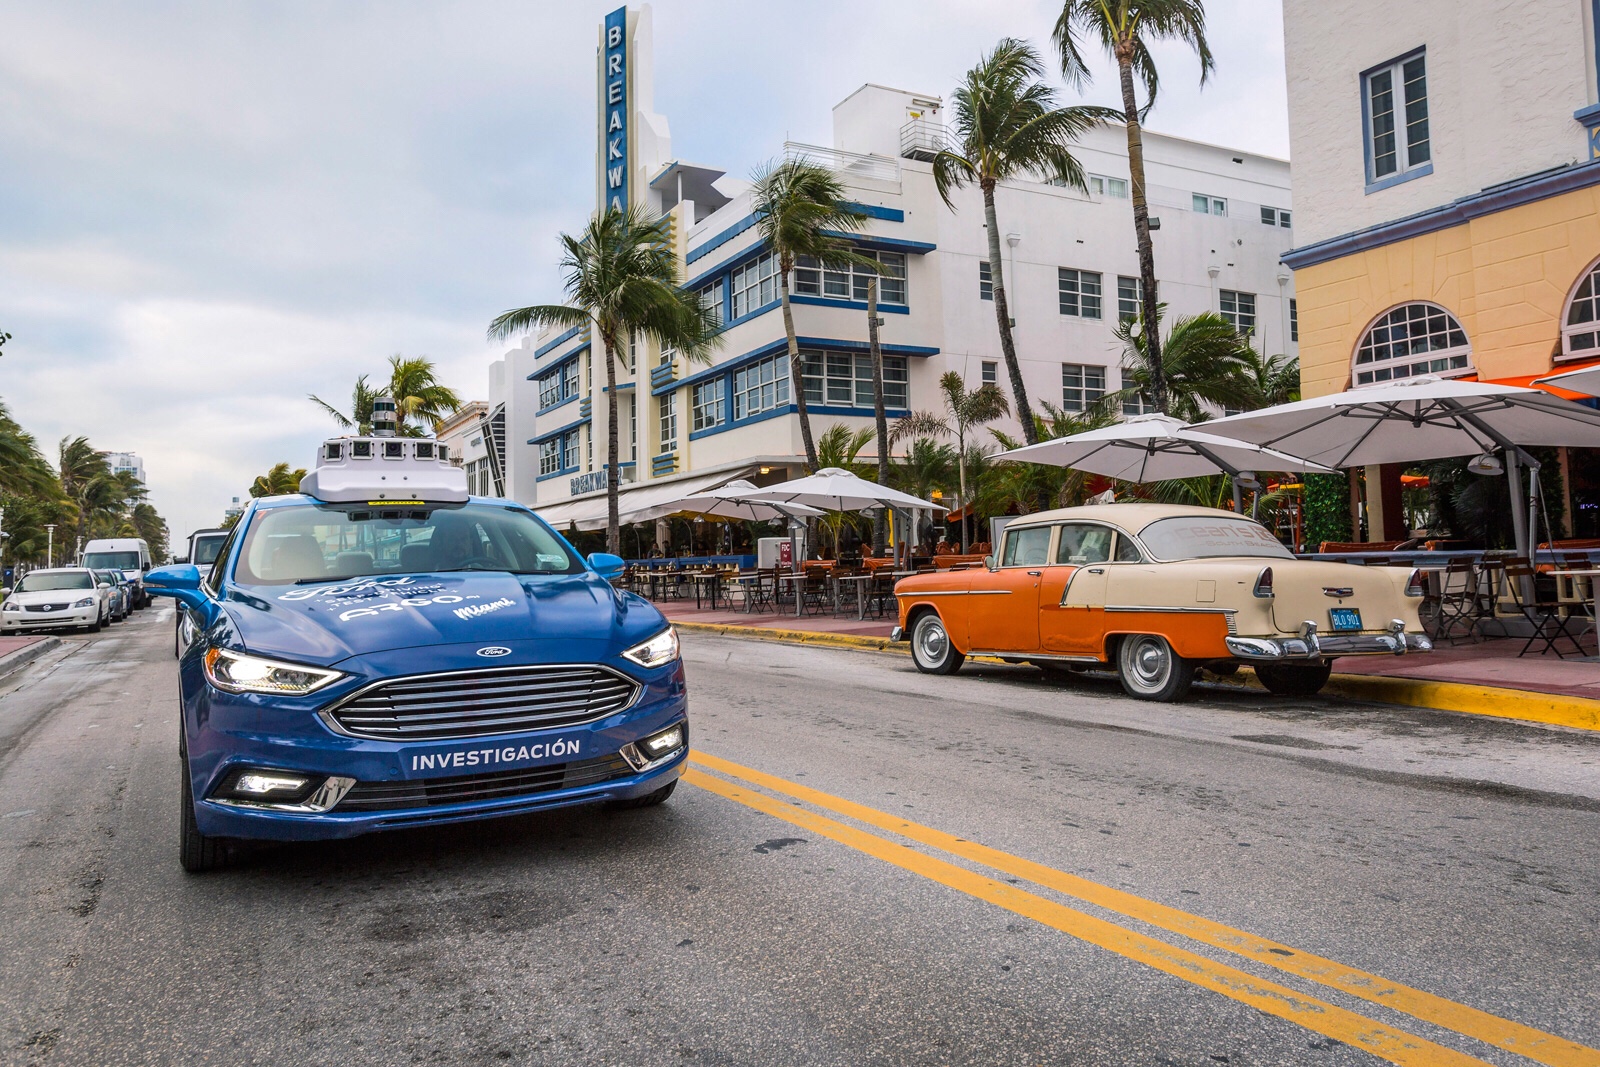 Ford taking it to Miami streets to test self-driving car service